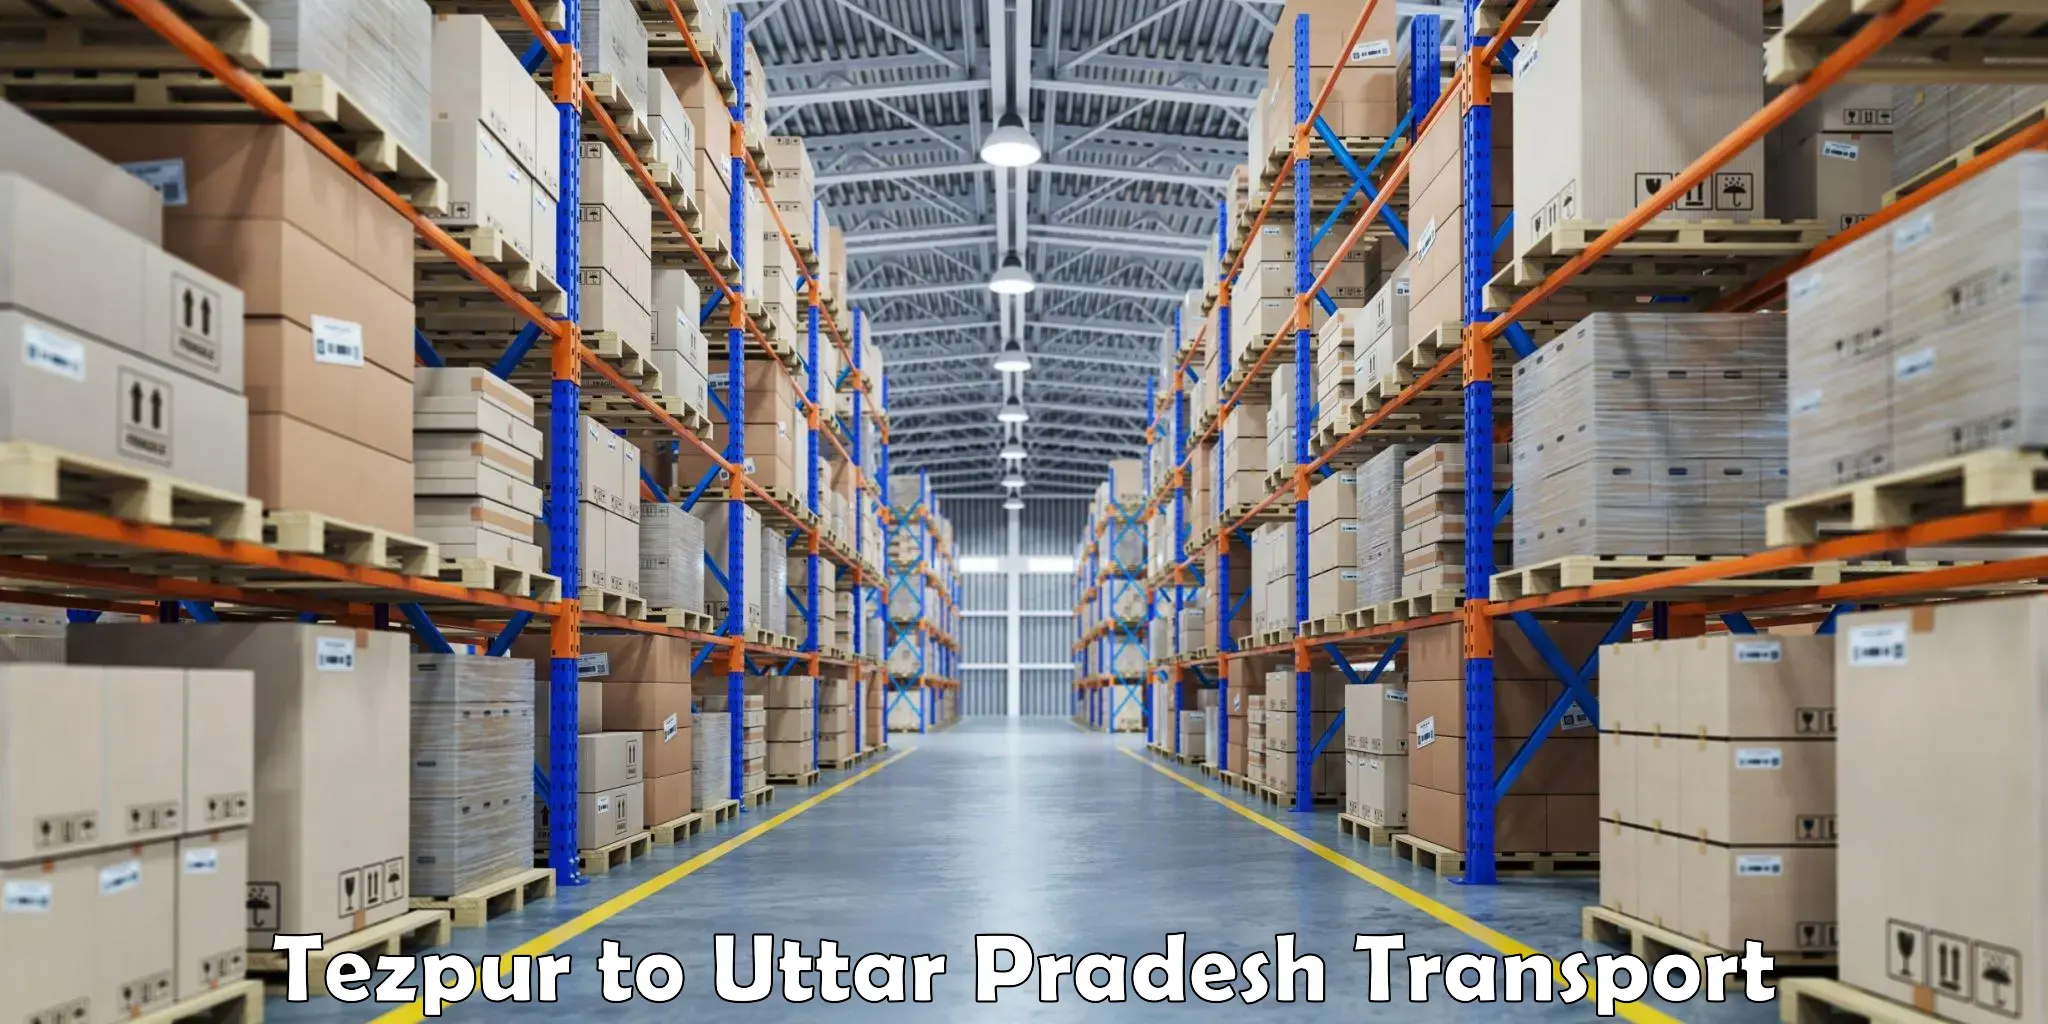 Part load transport service in India Tezpur to Khutar